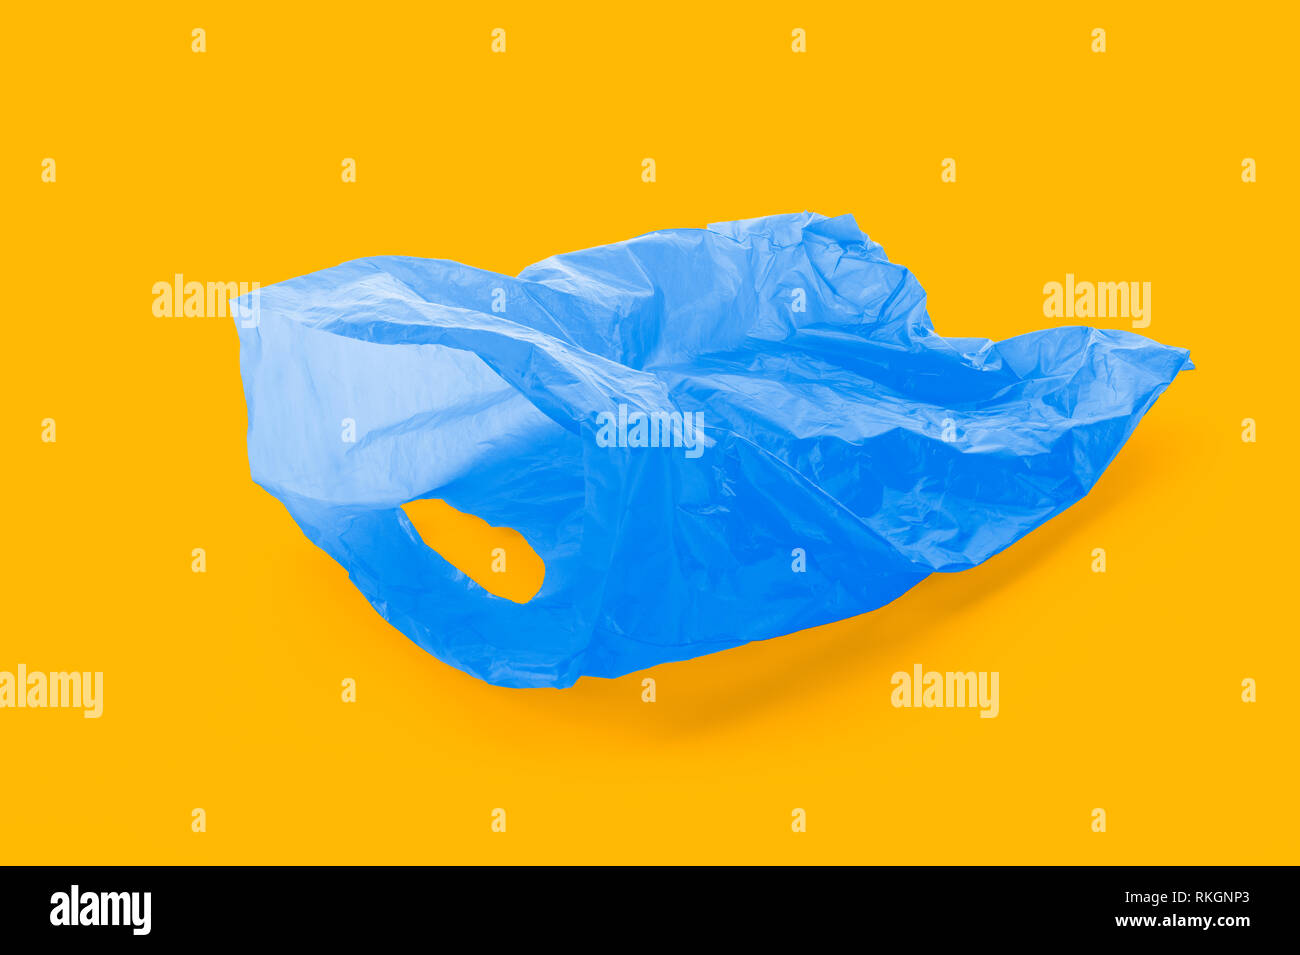 Floating empty blue plastic garbage bag on complementary orange background, Stock Photo